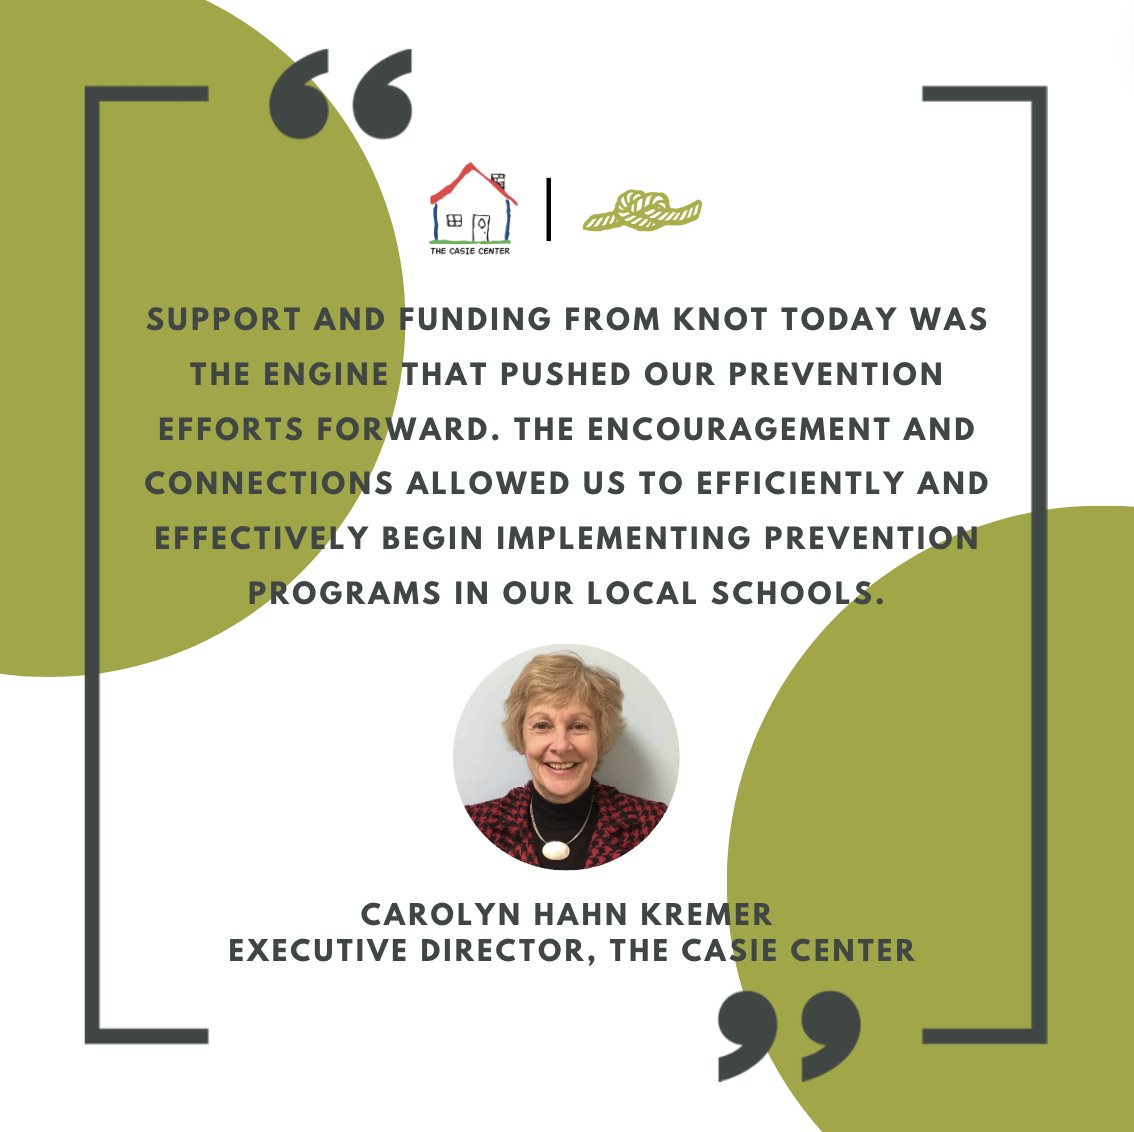 kNot Today provides critical leadership and resources to fuel prevention efforts across Indiana and the Carolinas. Through partnership cultivation, research, and strategic planning, we have developed effective programs to ensure we are getting ahead of abuse before it begins.